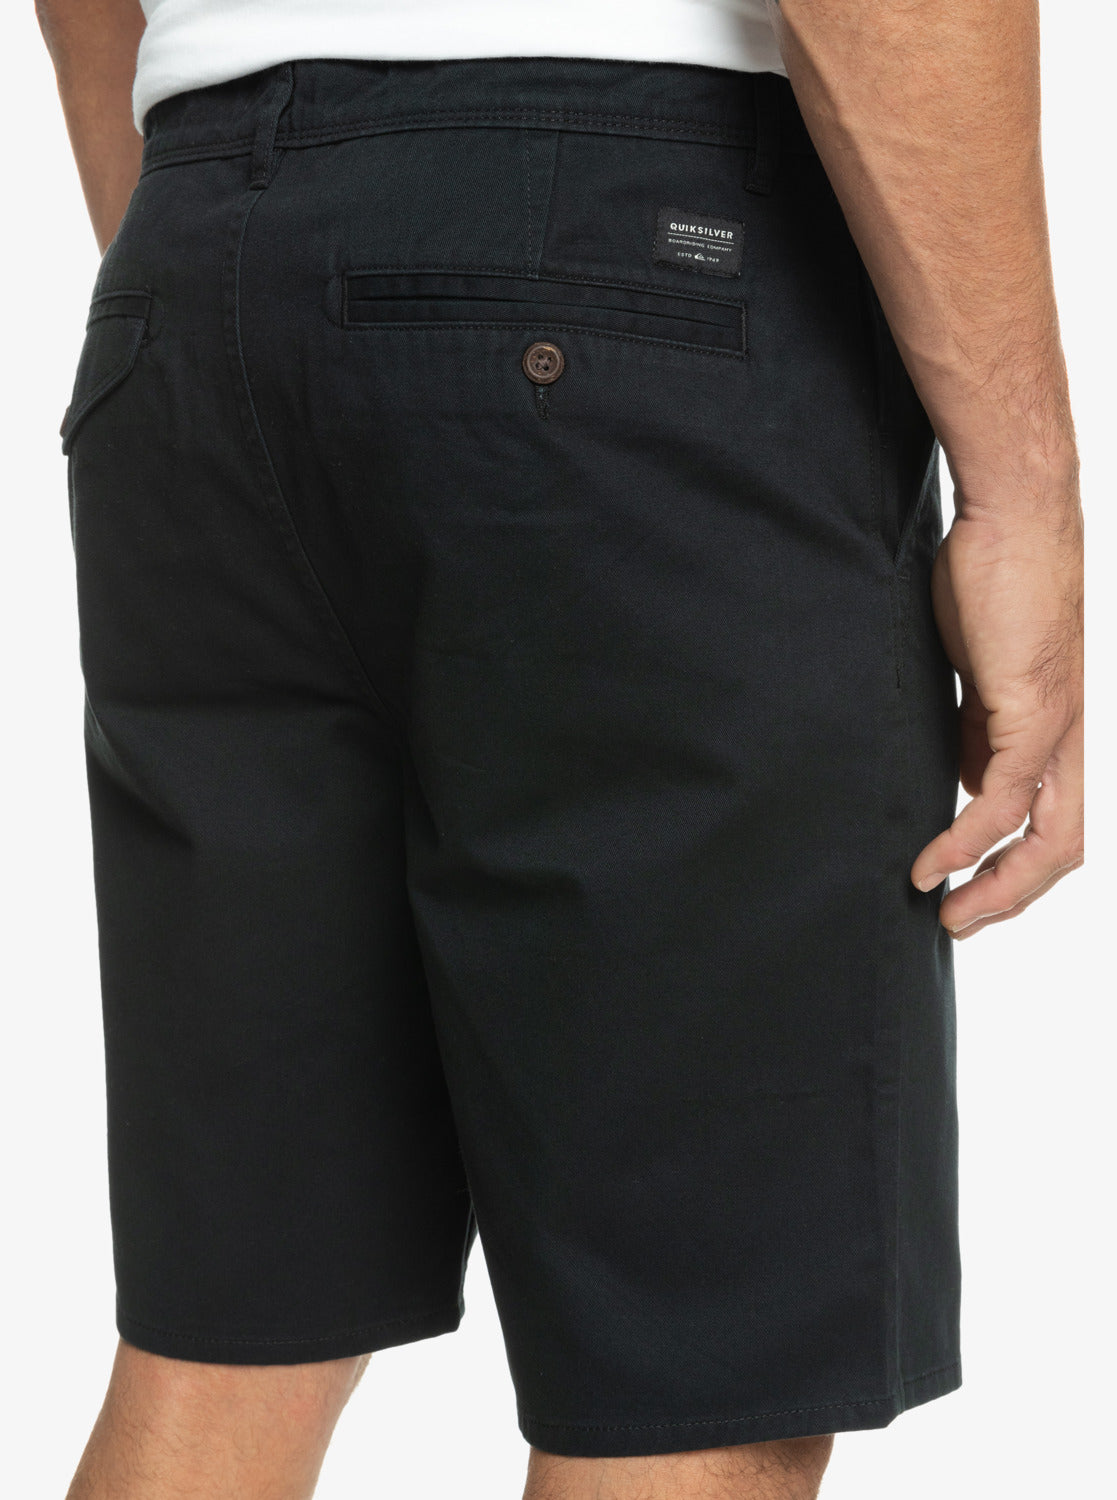 Quiksilver Everyday Chino Light Walkshorts in black from rear